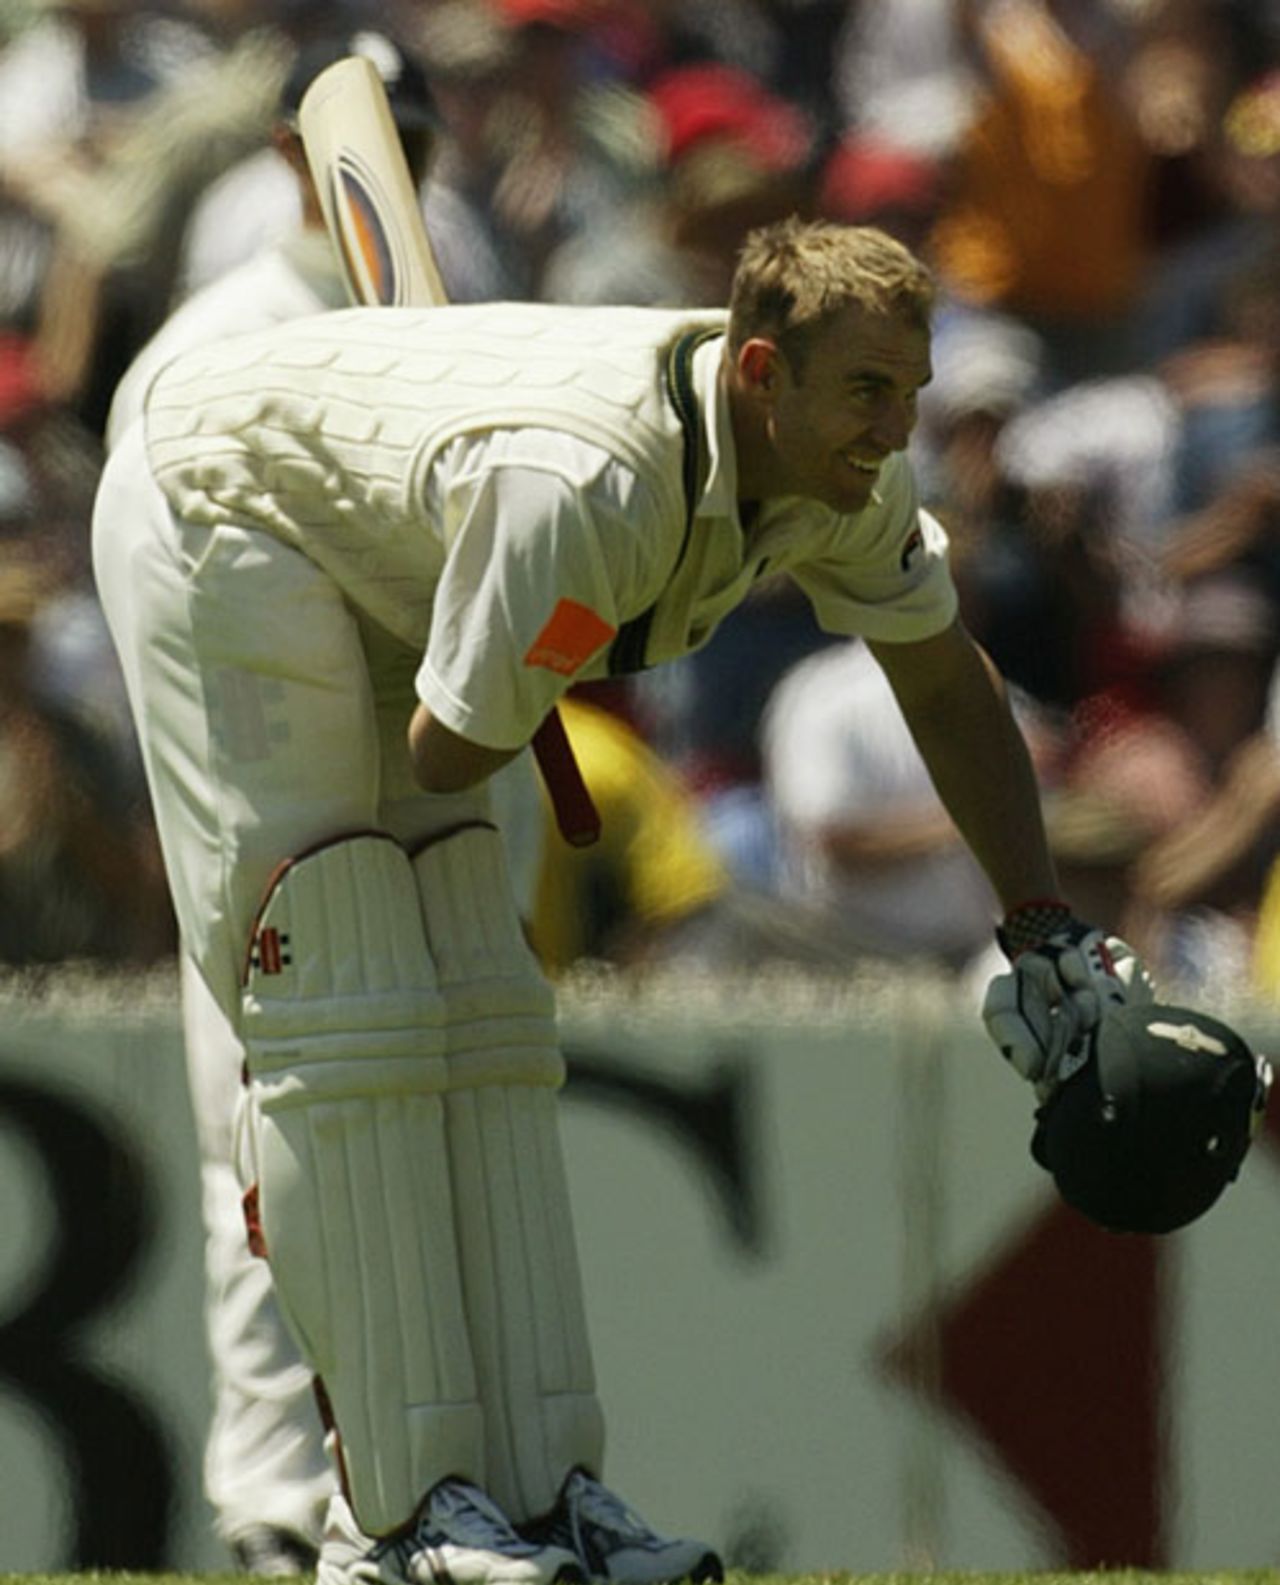 Matthew Hayden bows to the crowd after reaching his century,Australia v England, 4th Test, Sydney, December 26, 2002